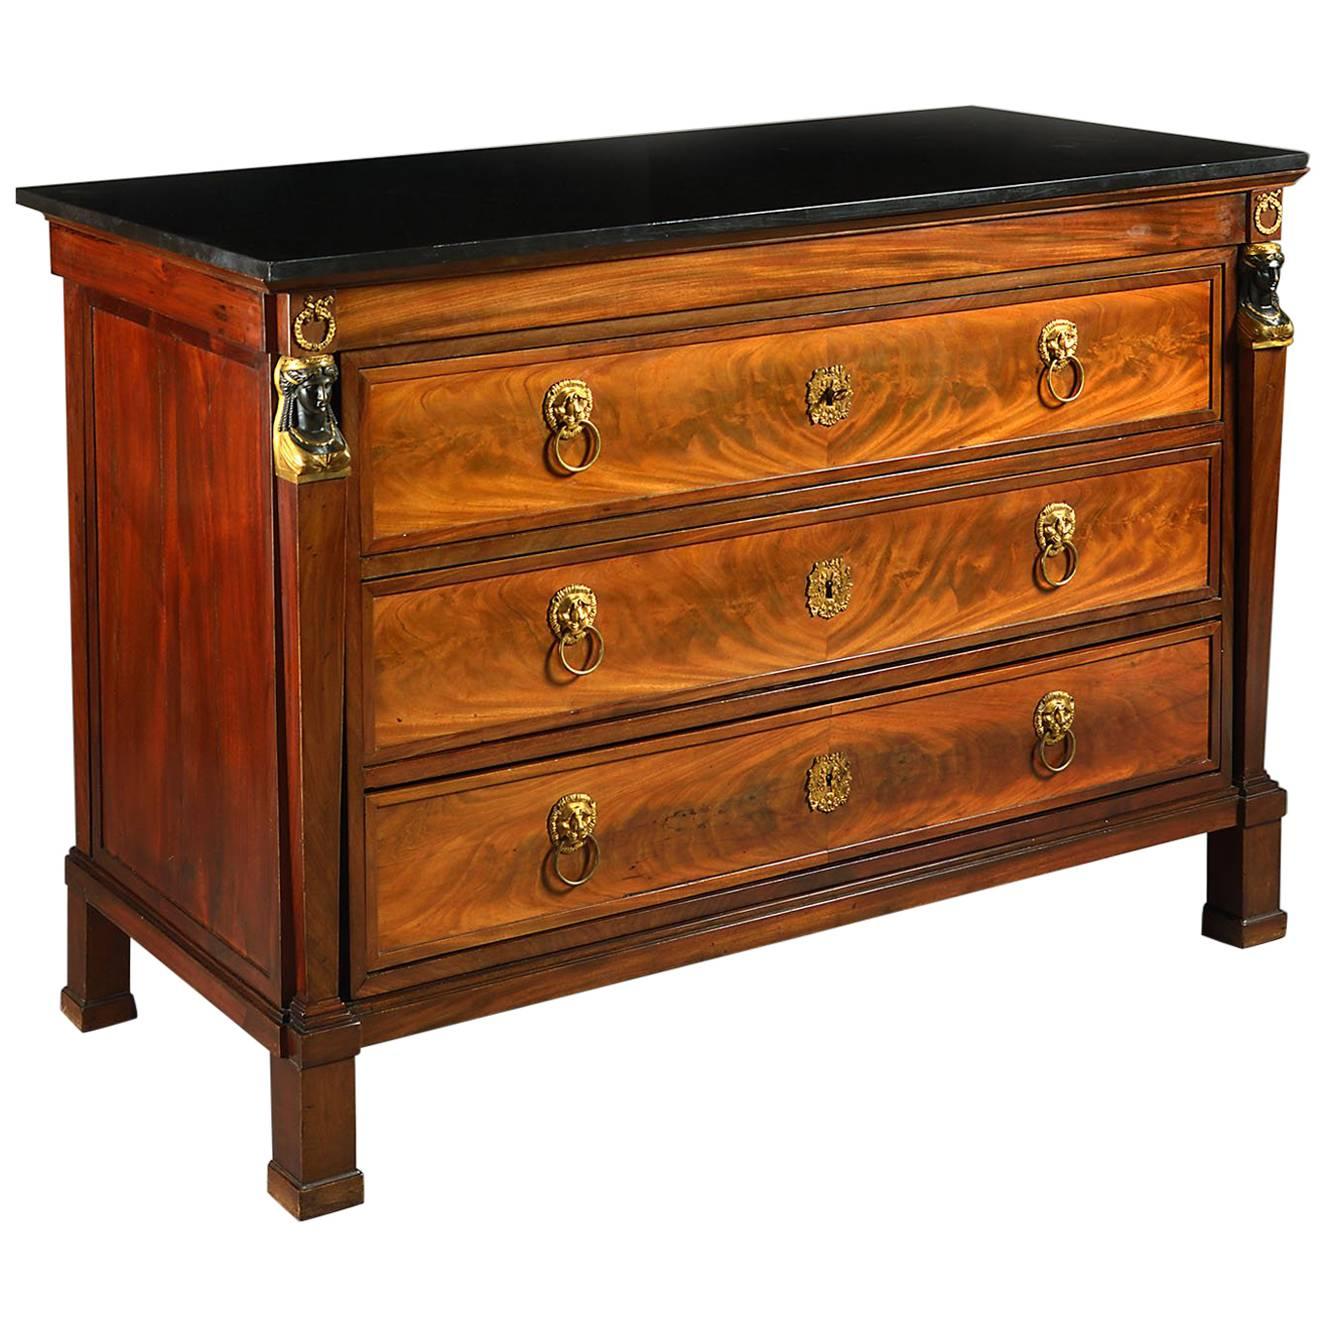 A fine early 19th century mahogany Empire commode with Egyptian caryatids, three graduated drawers, retaining the original fire gilt lion mask handles, with black marble top.